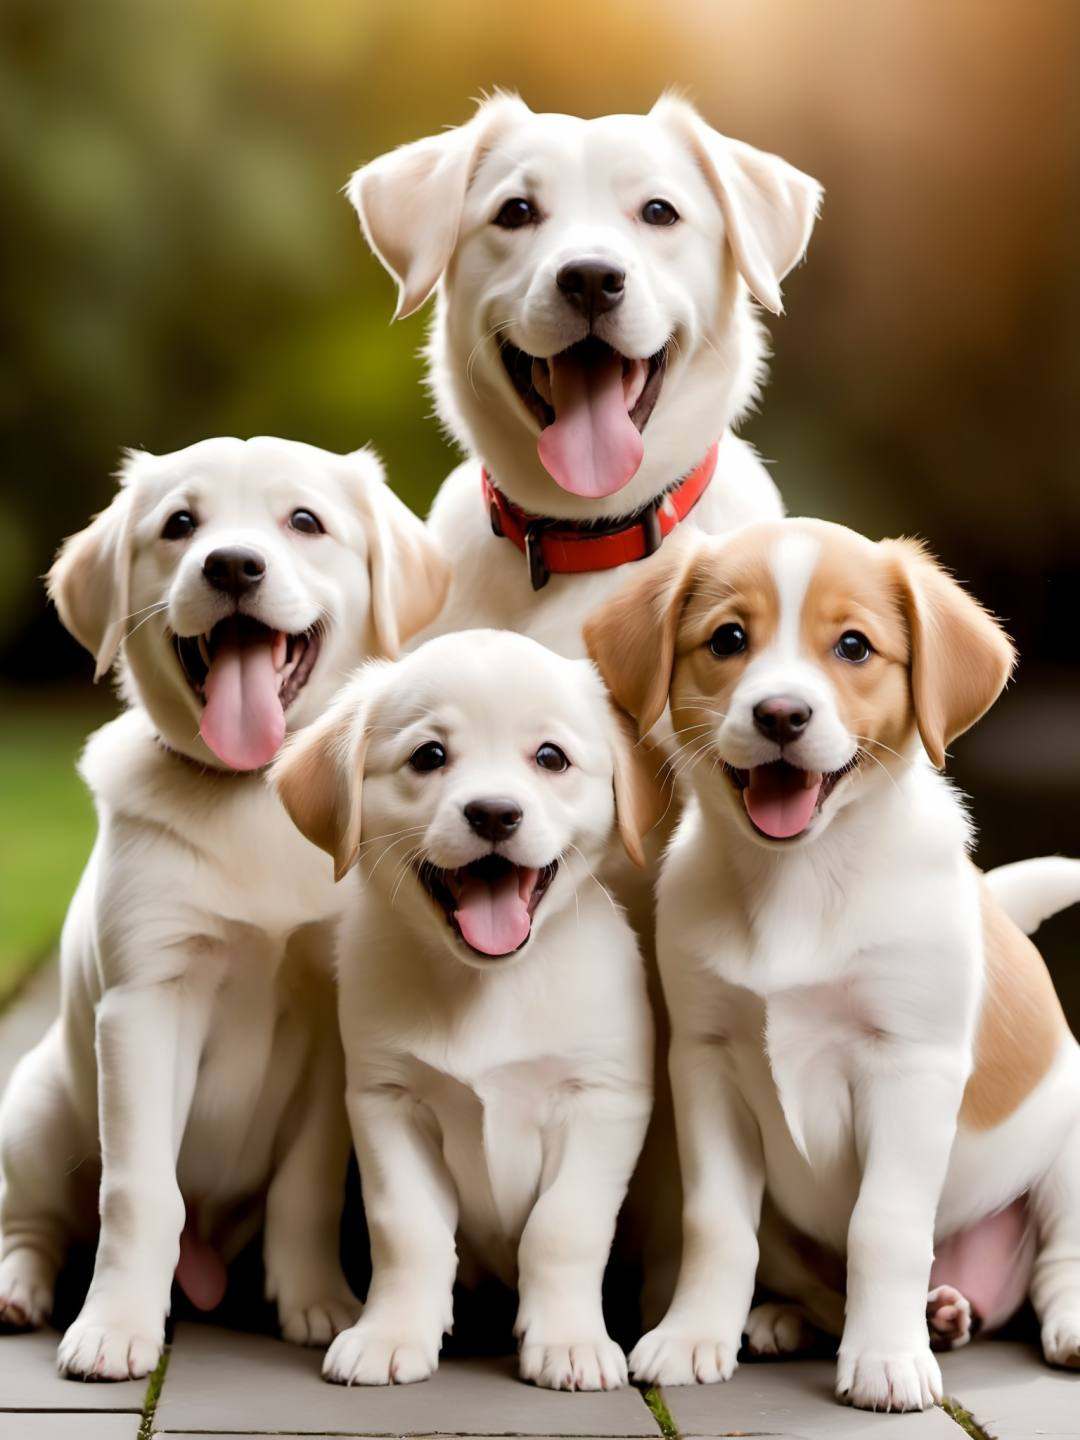 Masterpiece, best quality, true, photo, group of dogs looking at the camera, pup, open mouth, surprised, scared, cute, high definition, 32k,